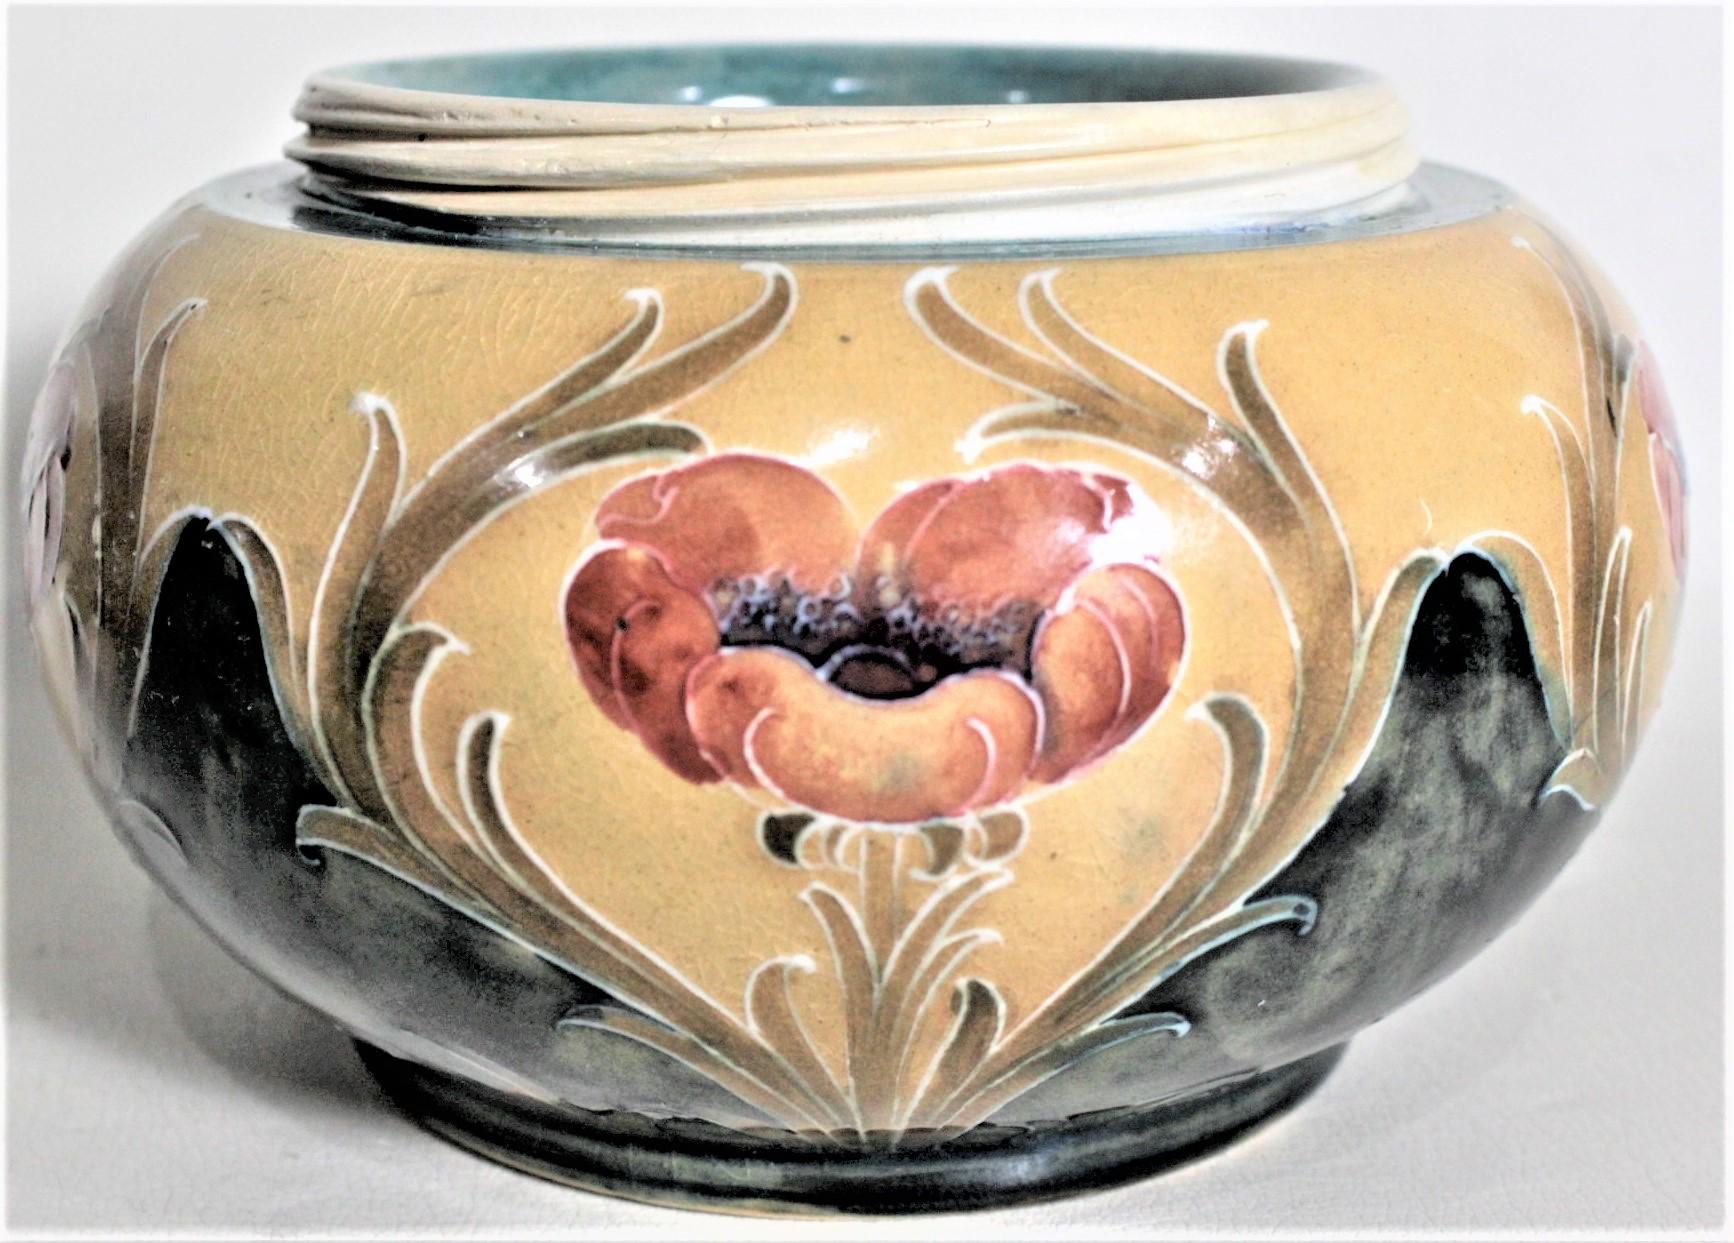 MacIntyre Moorcroft 'Poppy' Patterned Art Pottery Tobacco or Dresser Jar In Good Condition For Sale In Hamilton, Ontario